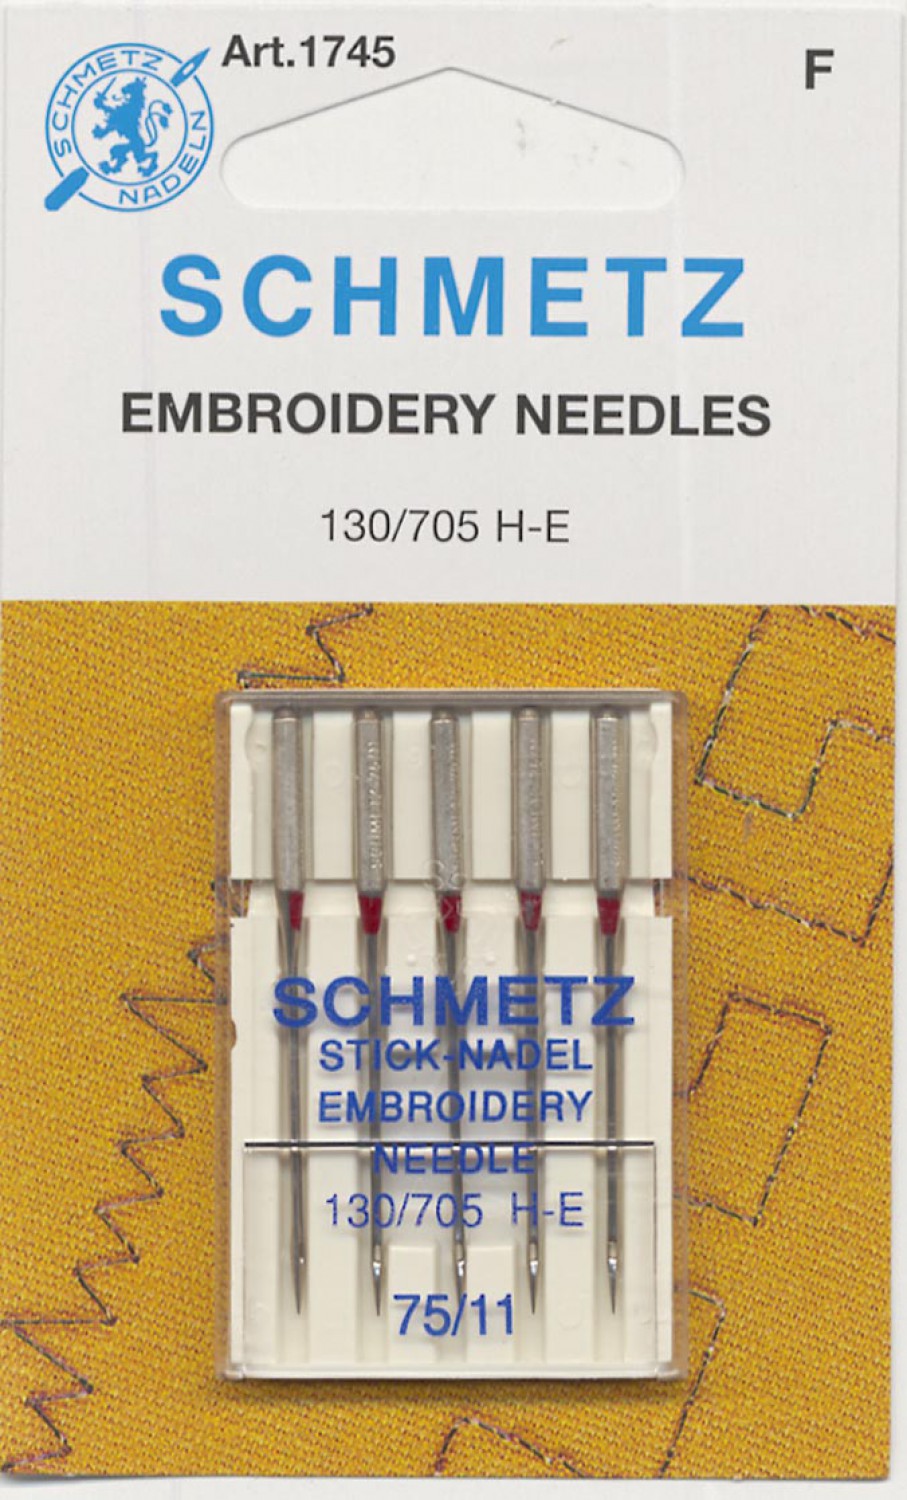 Schmetz Embroidery Needle - 75/11 - 1 Package of 5 Needles